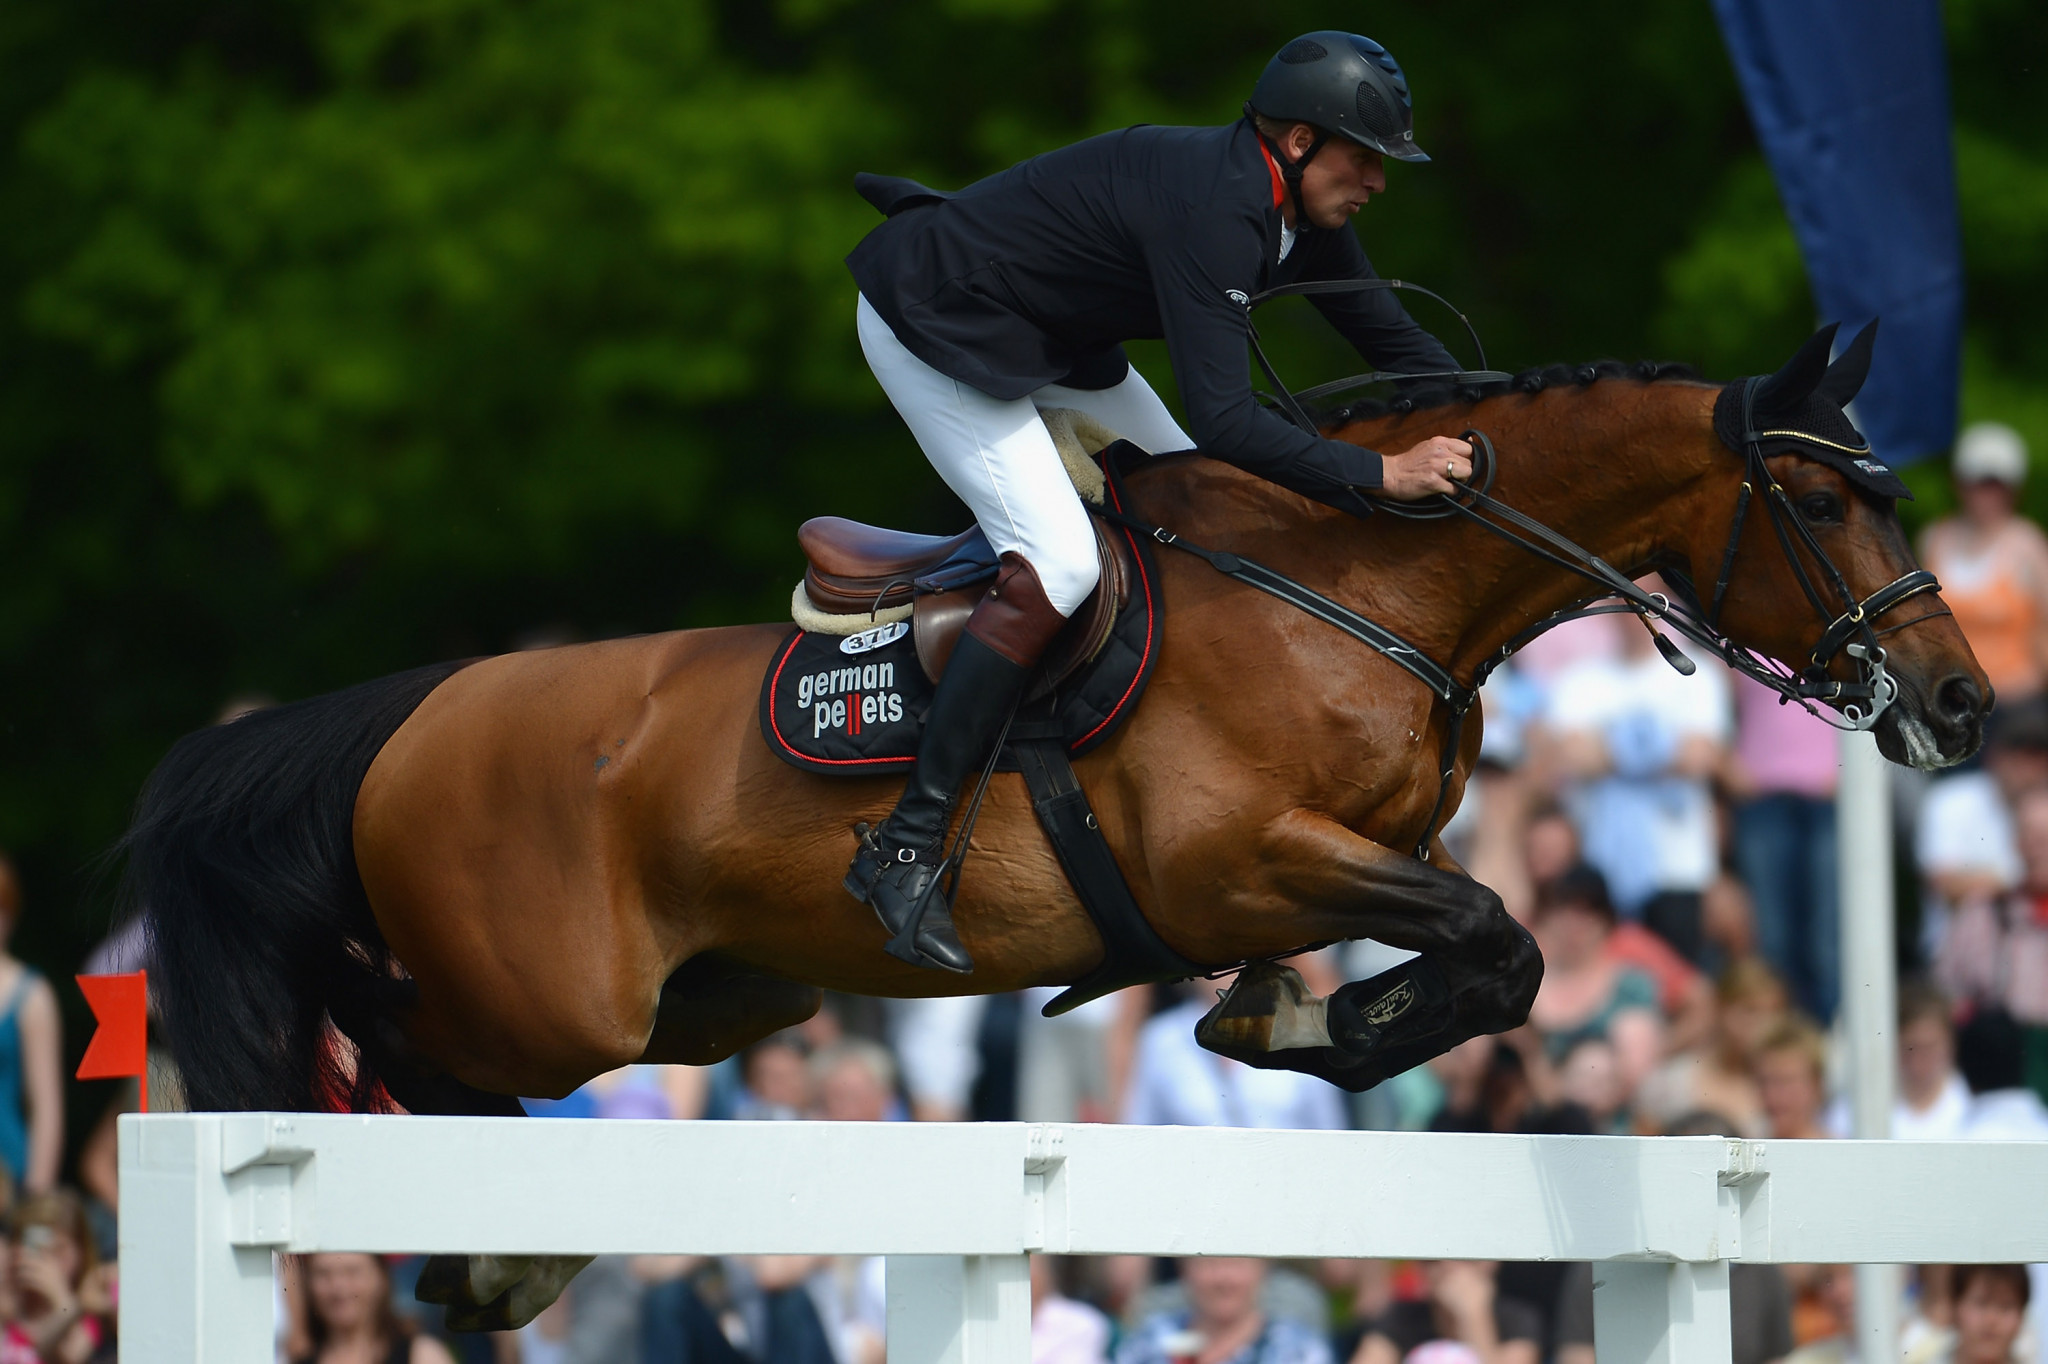 Germany's André Thieme finished in second place in the "Prize of Handwerk" jumping competition ©Getty Images